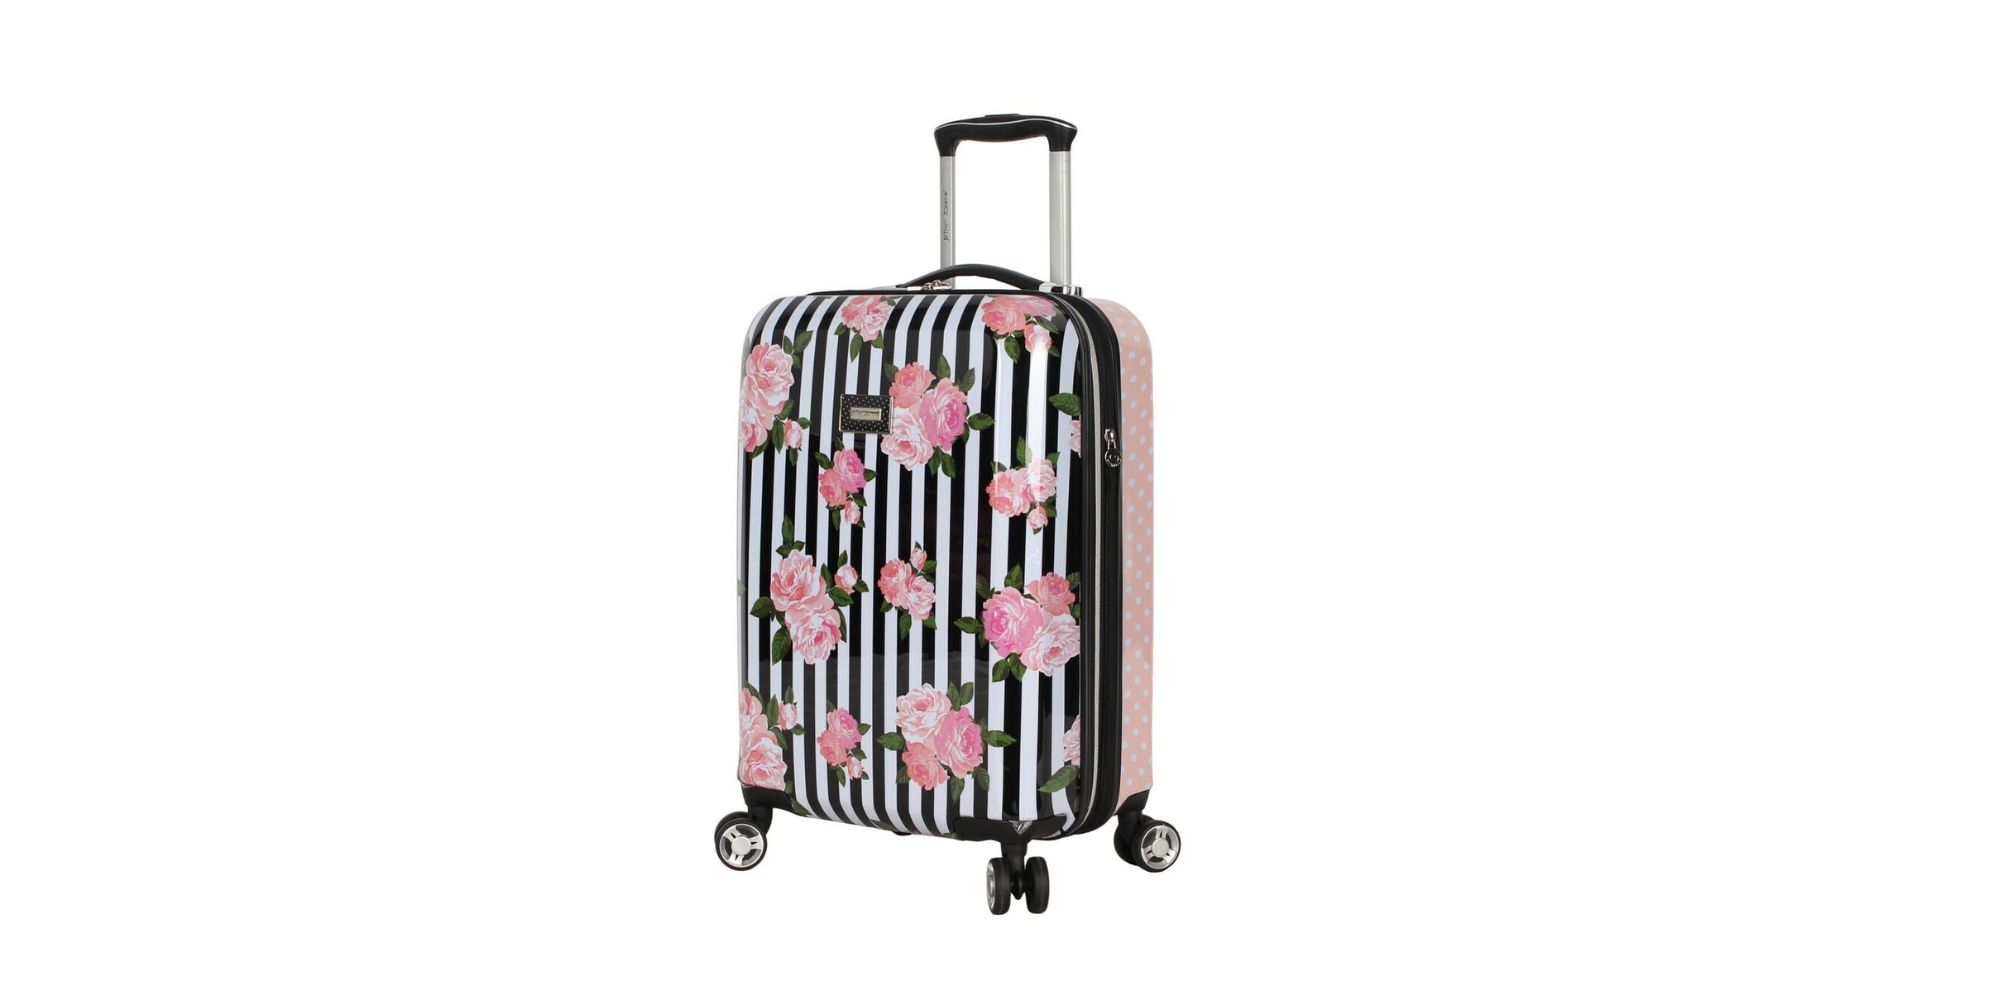  Betsey Johnson Designer Carry On Luggage Collection -  Lightweight Pattern 22 Inch Duffel Bag- Weekender Overnight Business Travel  Suitcase with 2- Rolling Spinner Wheels (Covered Roses)